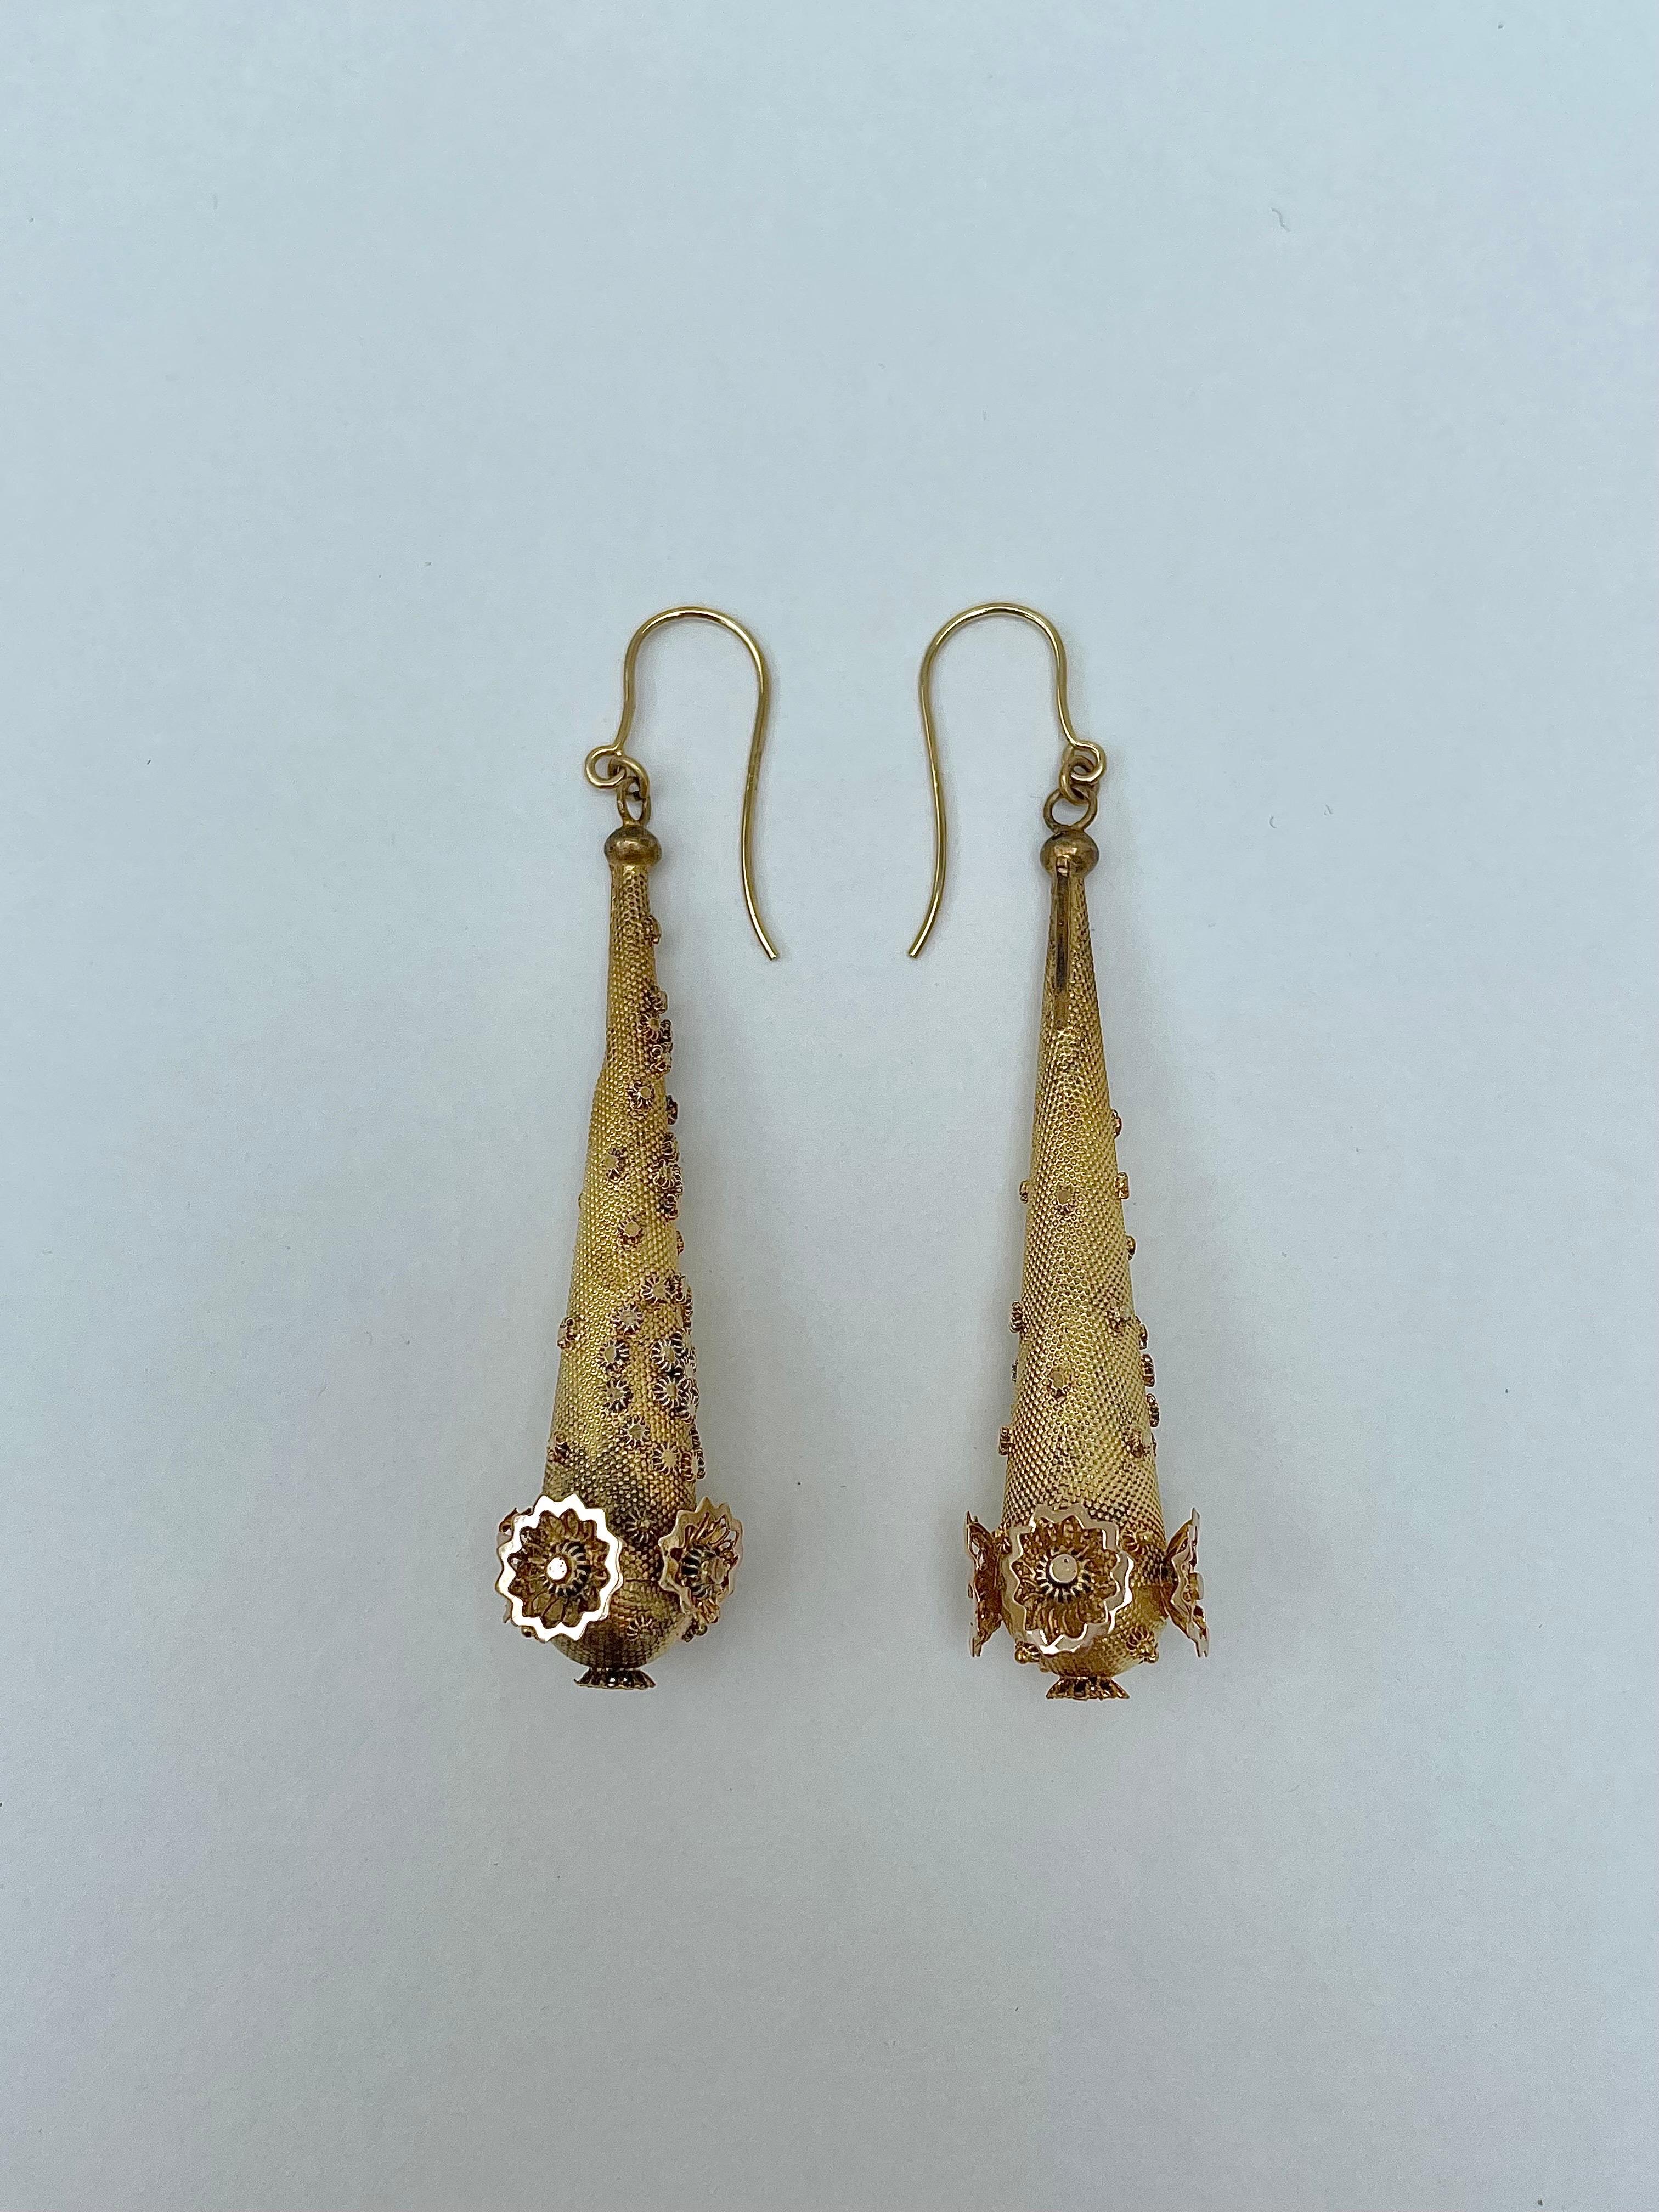 Victorian Ornate Yellow Gold Long Dangle Floral Earrings 

incredible highly detailed dangle earrings 

The item comes without the box in the photos but will be presented in a  gift box

Measurements: weight 5g, length 51.2mm, width